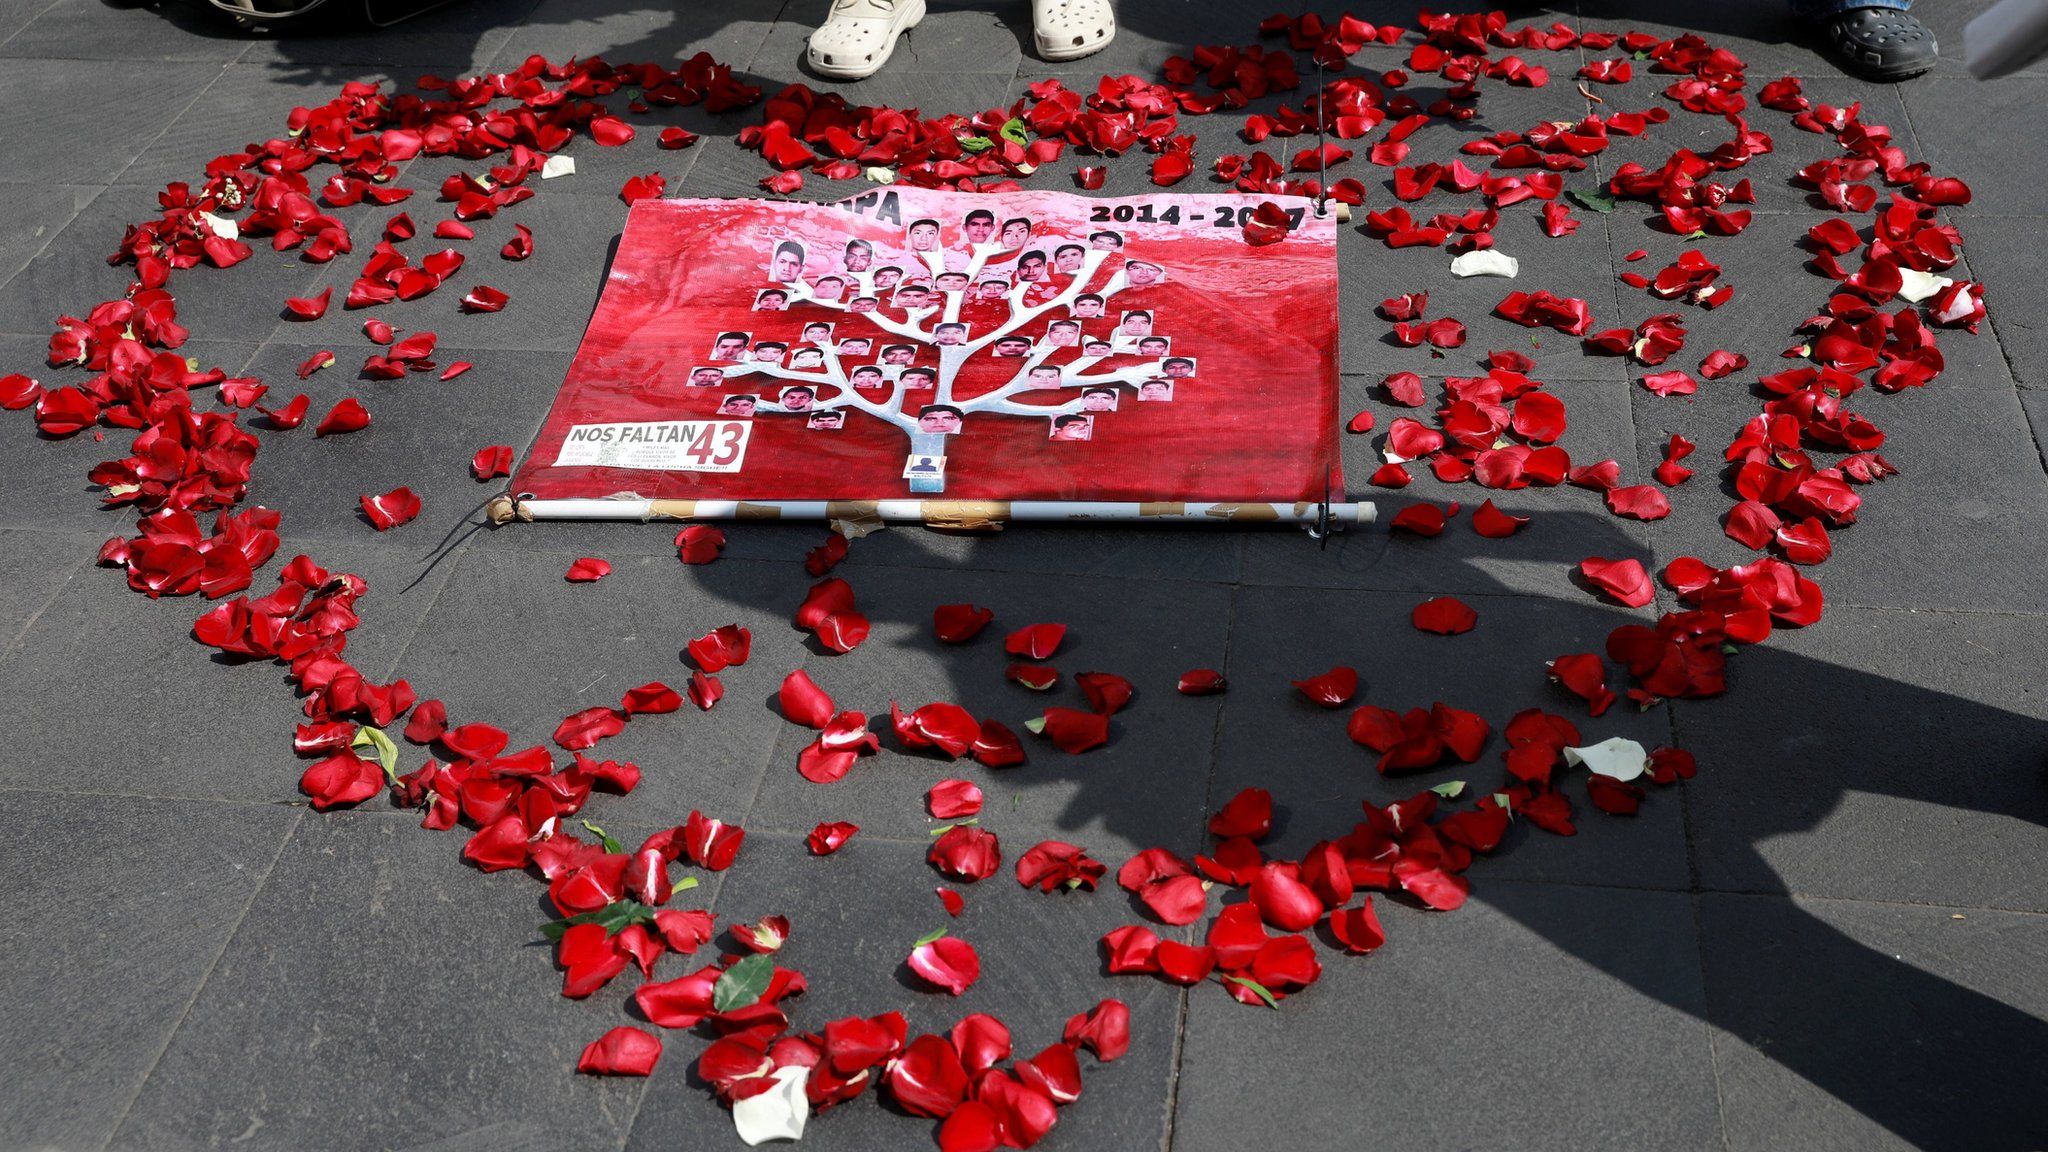 Pictures of the 43 missing students are displayed inside a heart shape made out of rose petals on the pavement in Mexico City